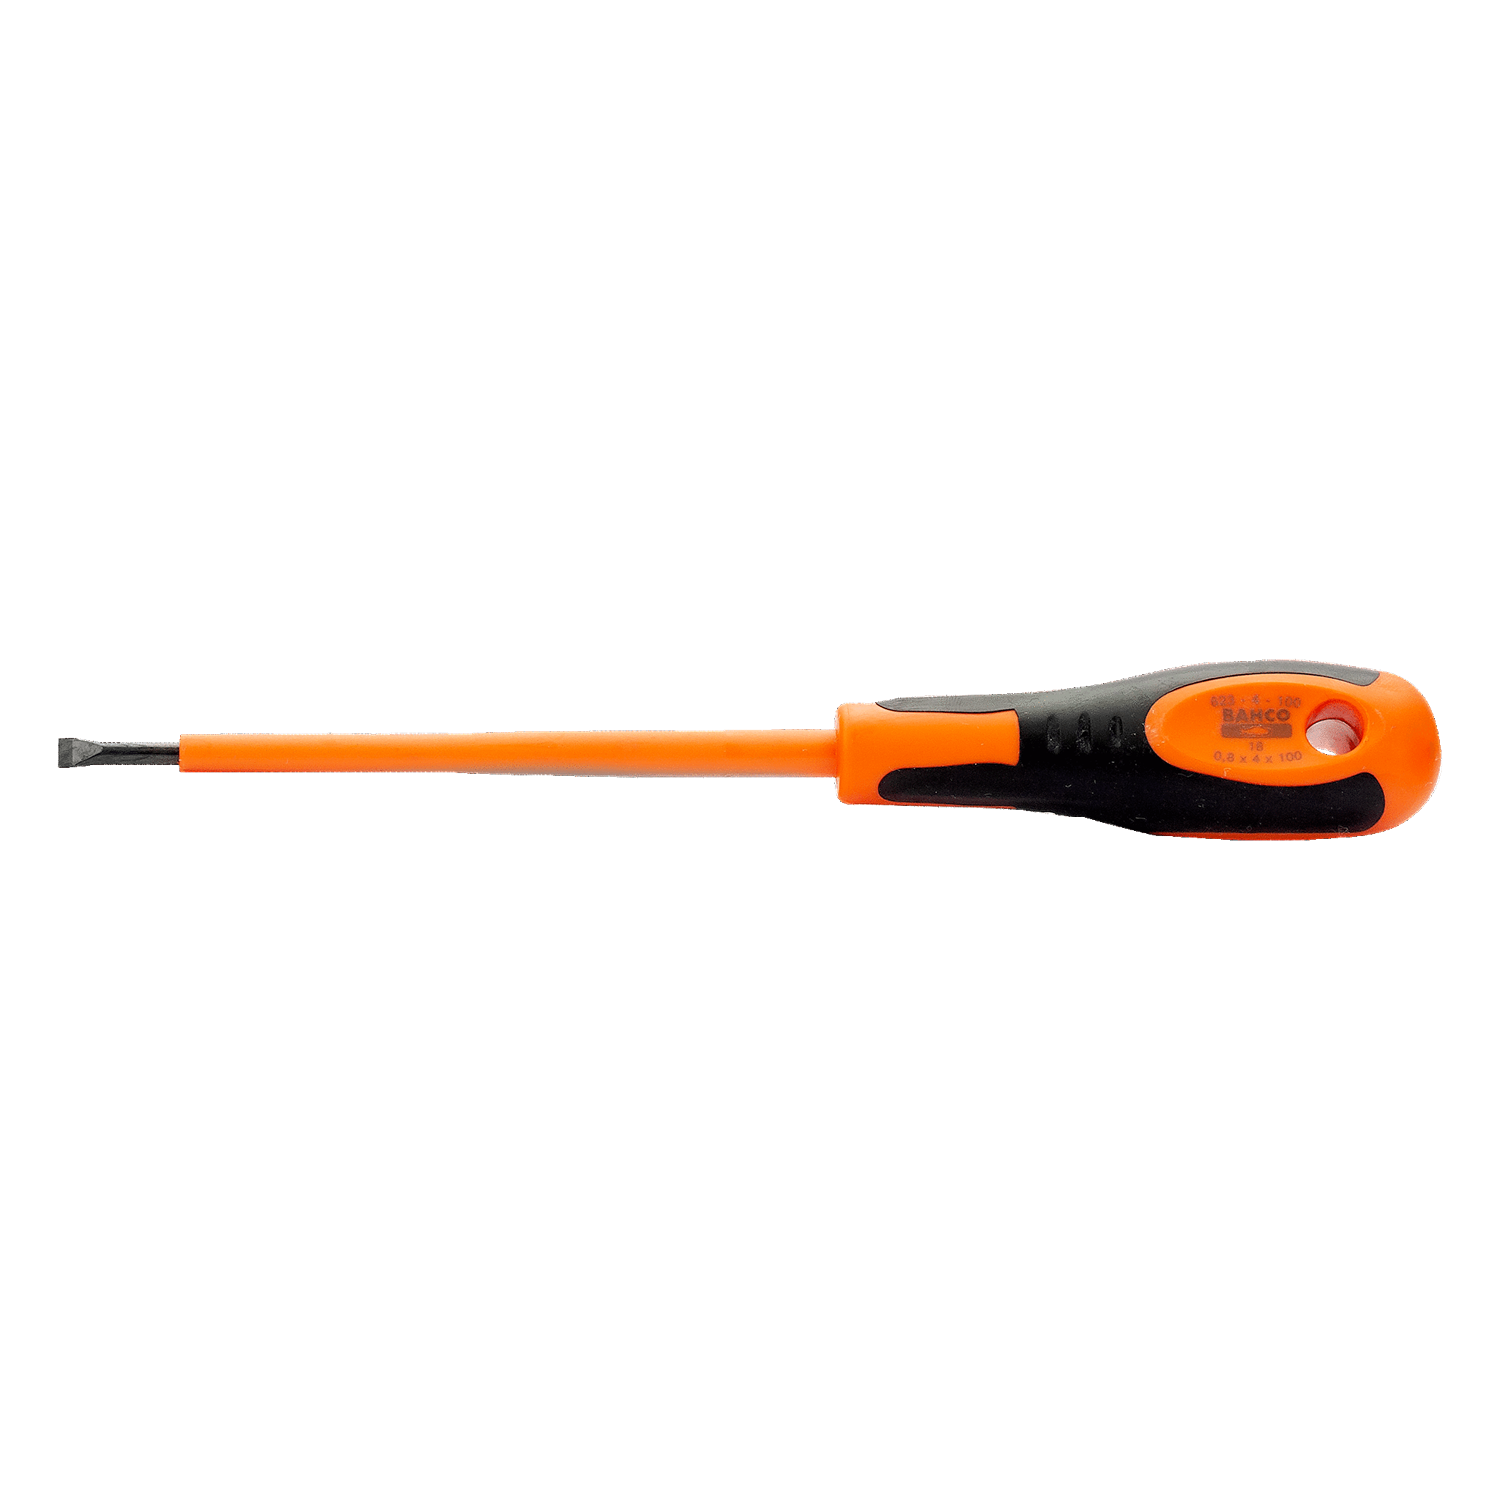 BAHCO 623 VDE Insulated Slotted Screwdriver 0.5 mm-1.2 mm - Premium Slotted Screwdriver from BAHCO - Shop now at Yew Aik.